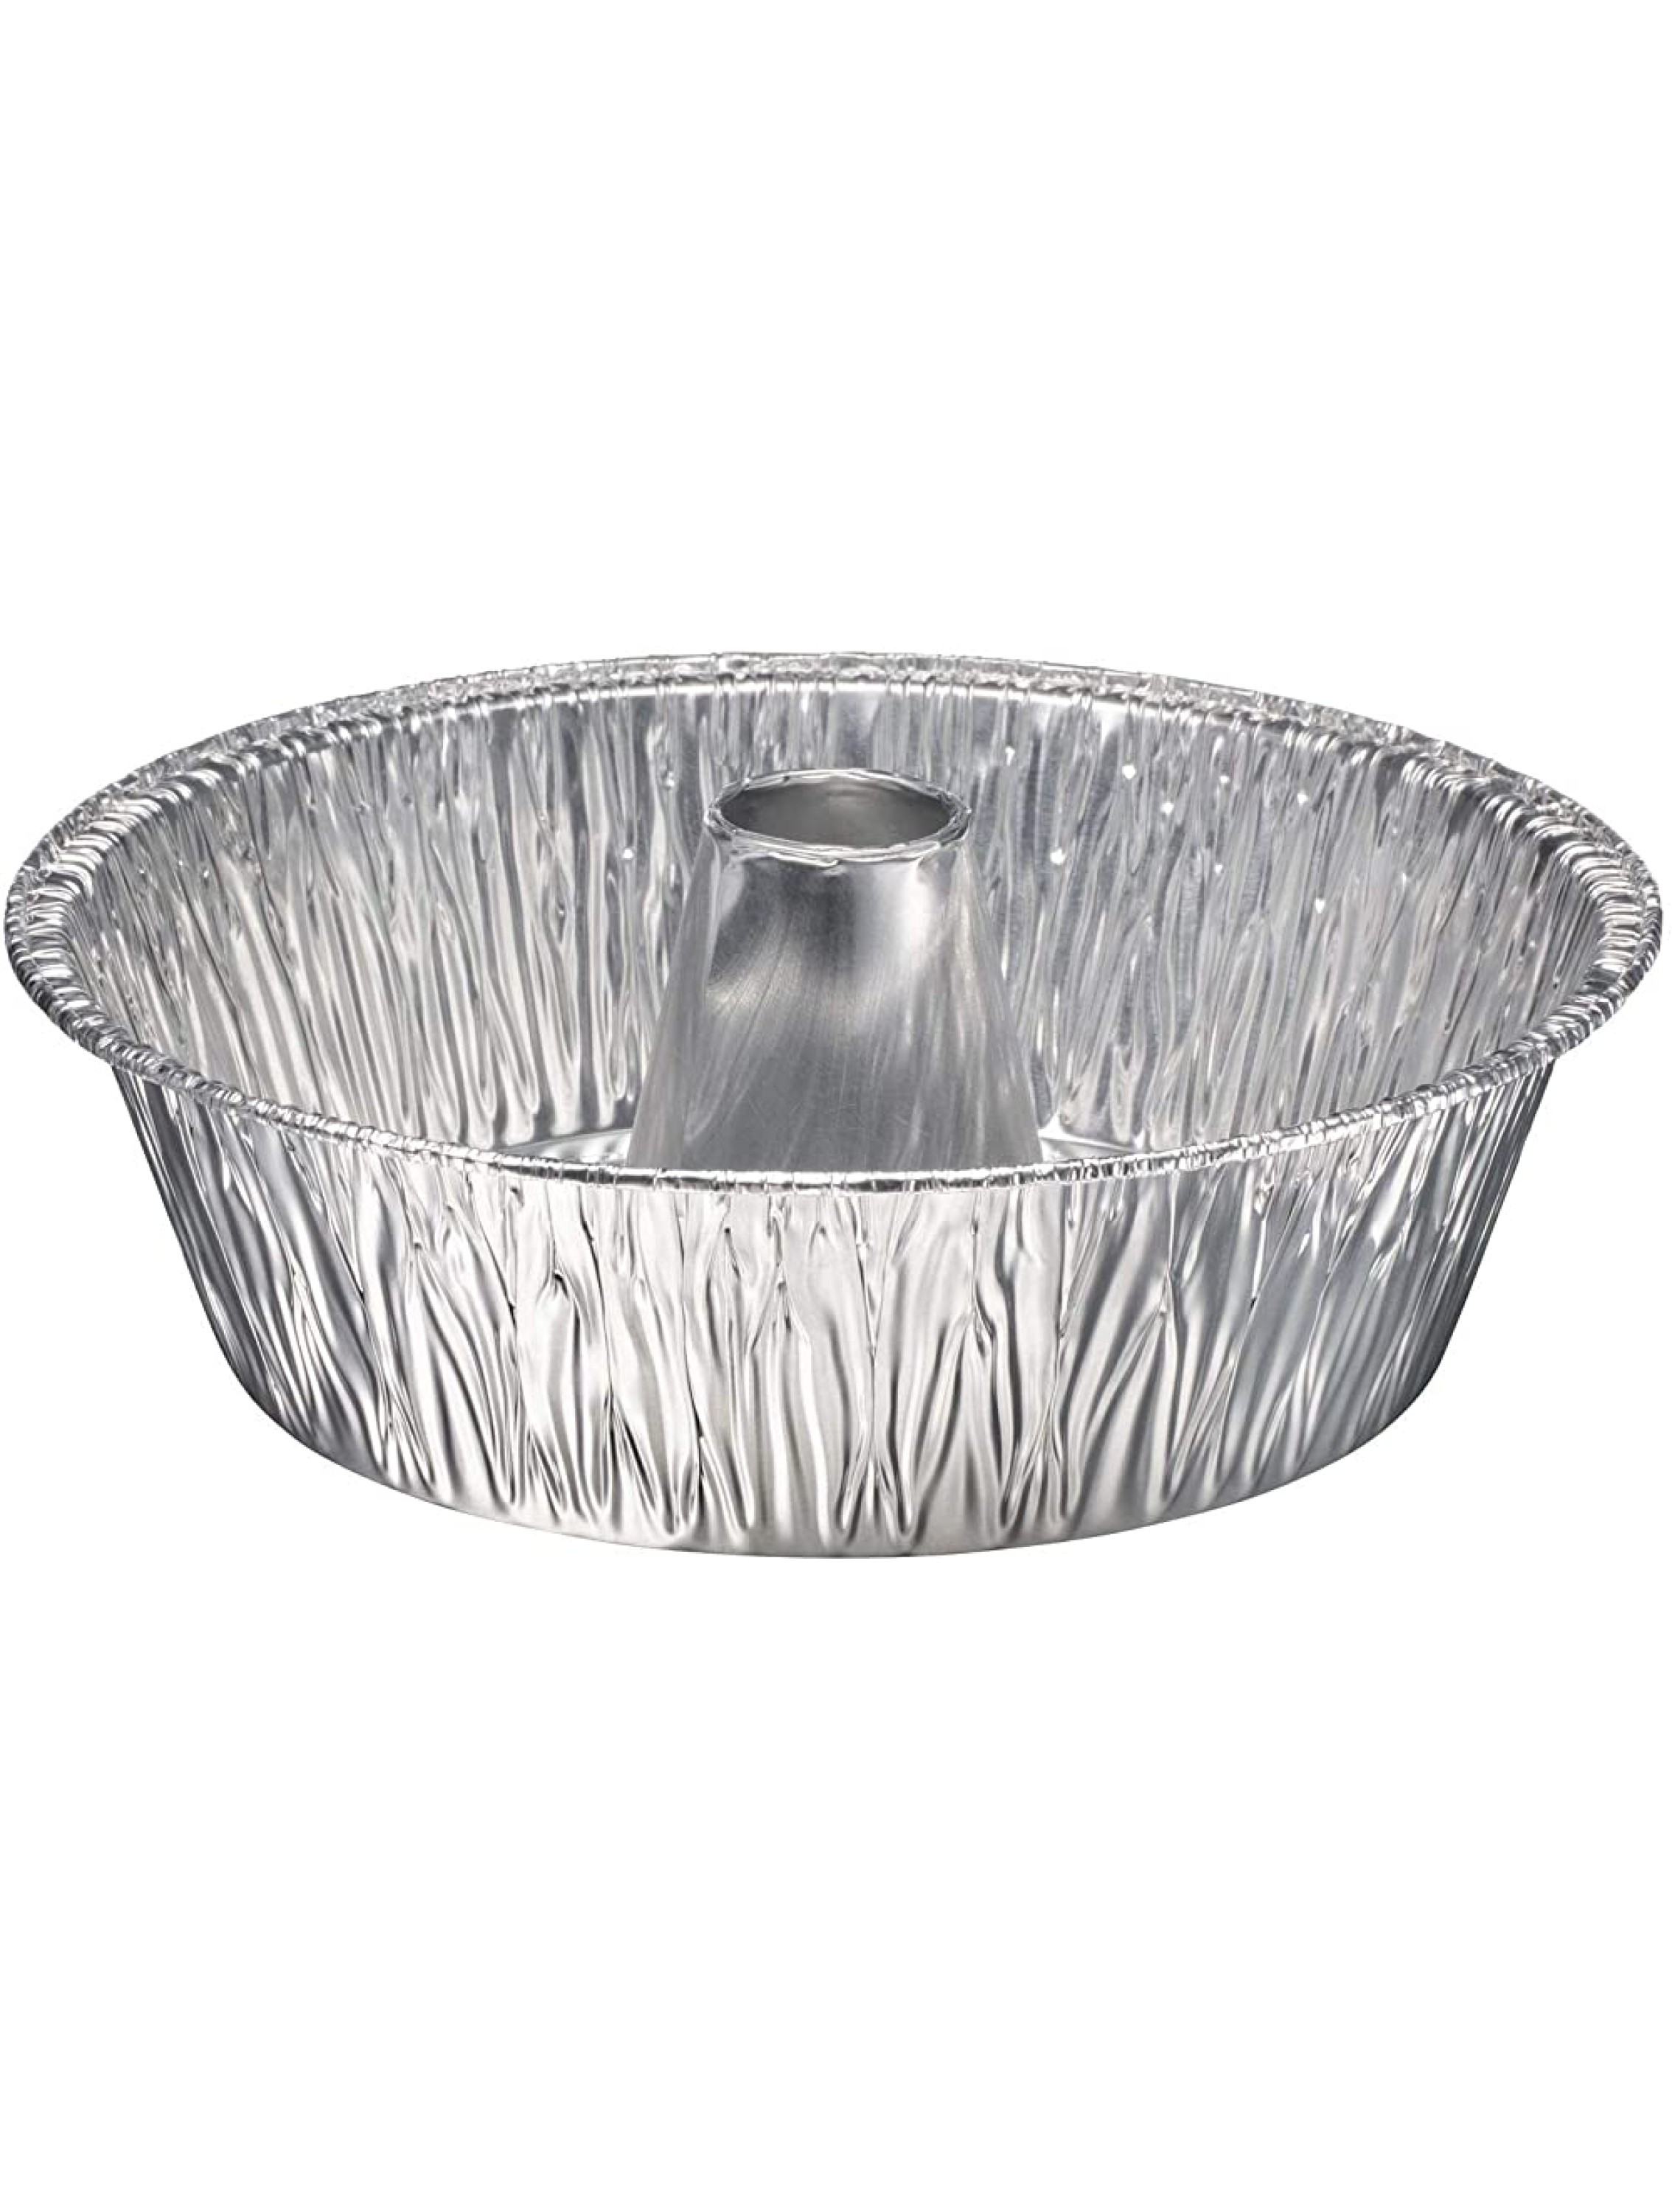 10 Disposable Round Cake Baking Pans Aluminum Foil Bundt Tube Tin Great for Baking Decorative Display Heavy Duty Aluminum Pan for Fruitcake Angel Food Cake 10 Counts - BWDVE4Q8W